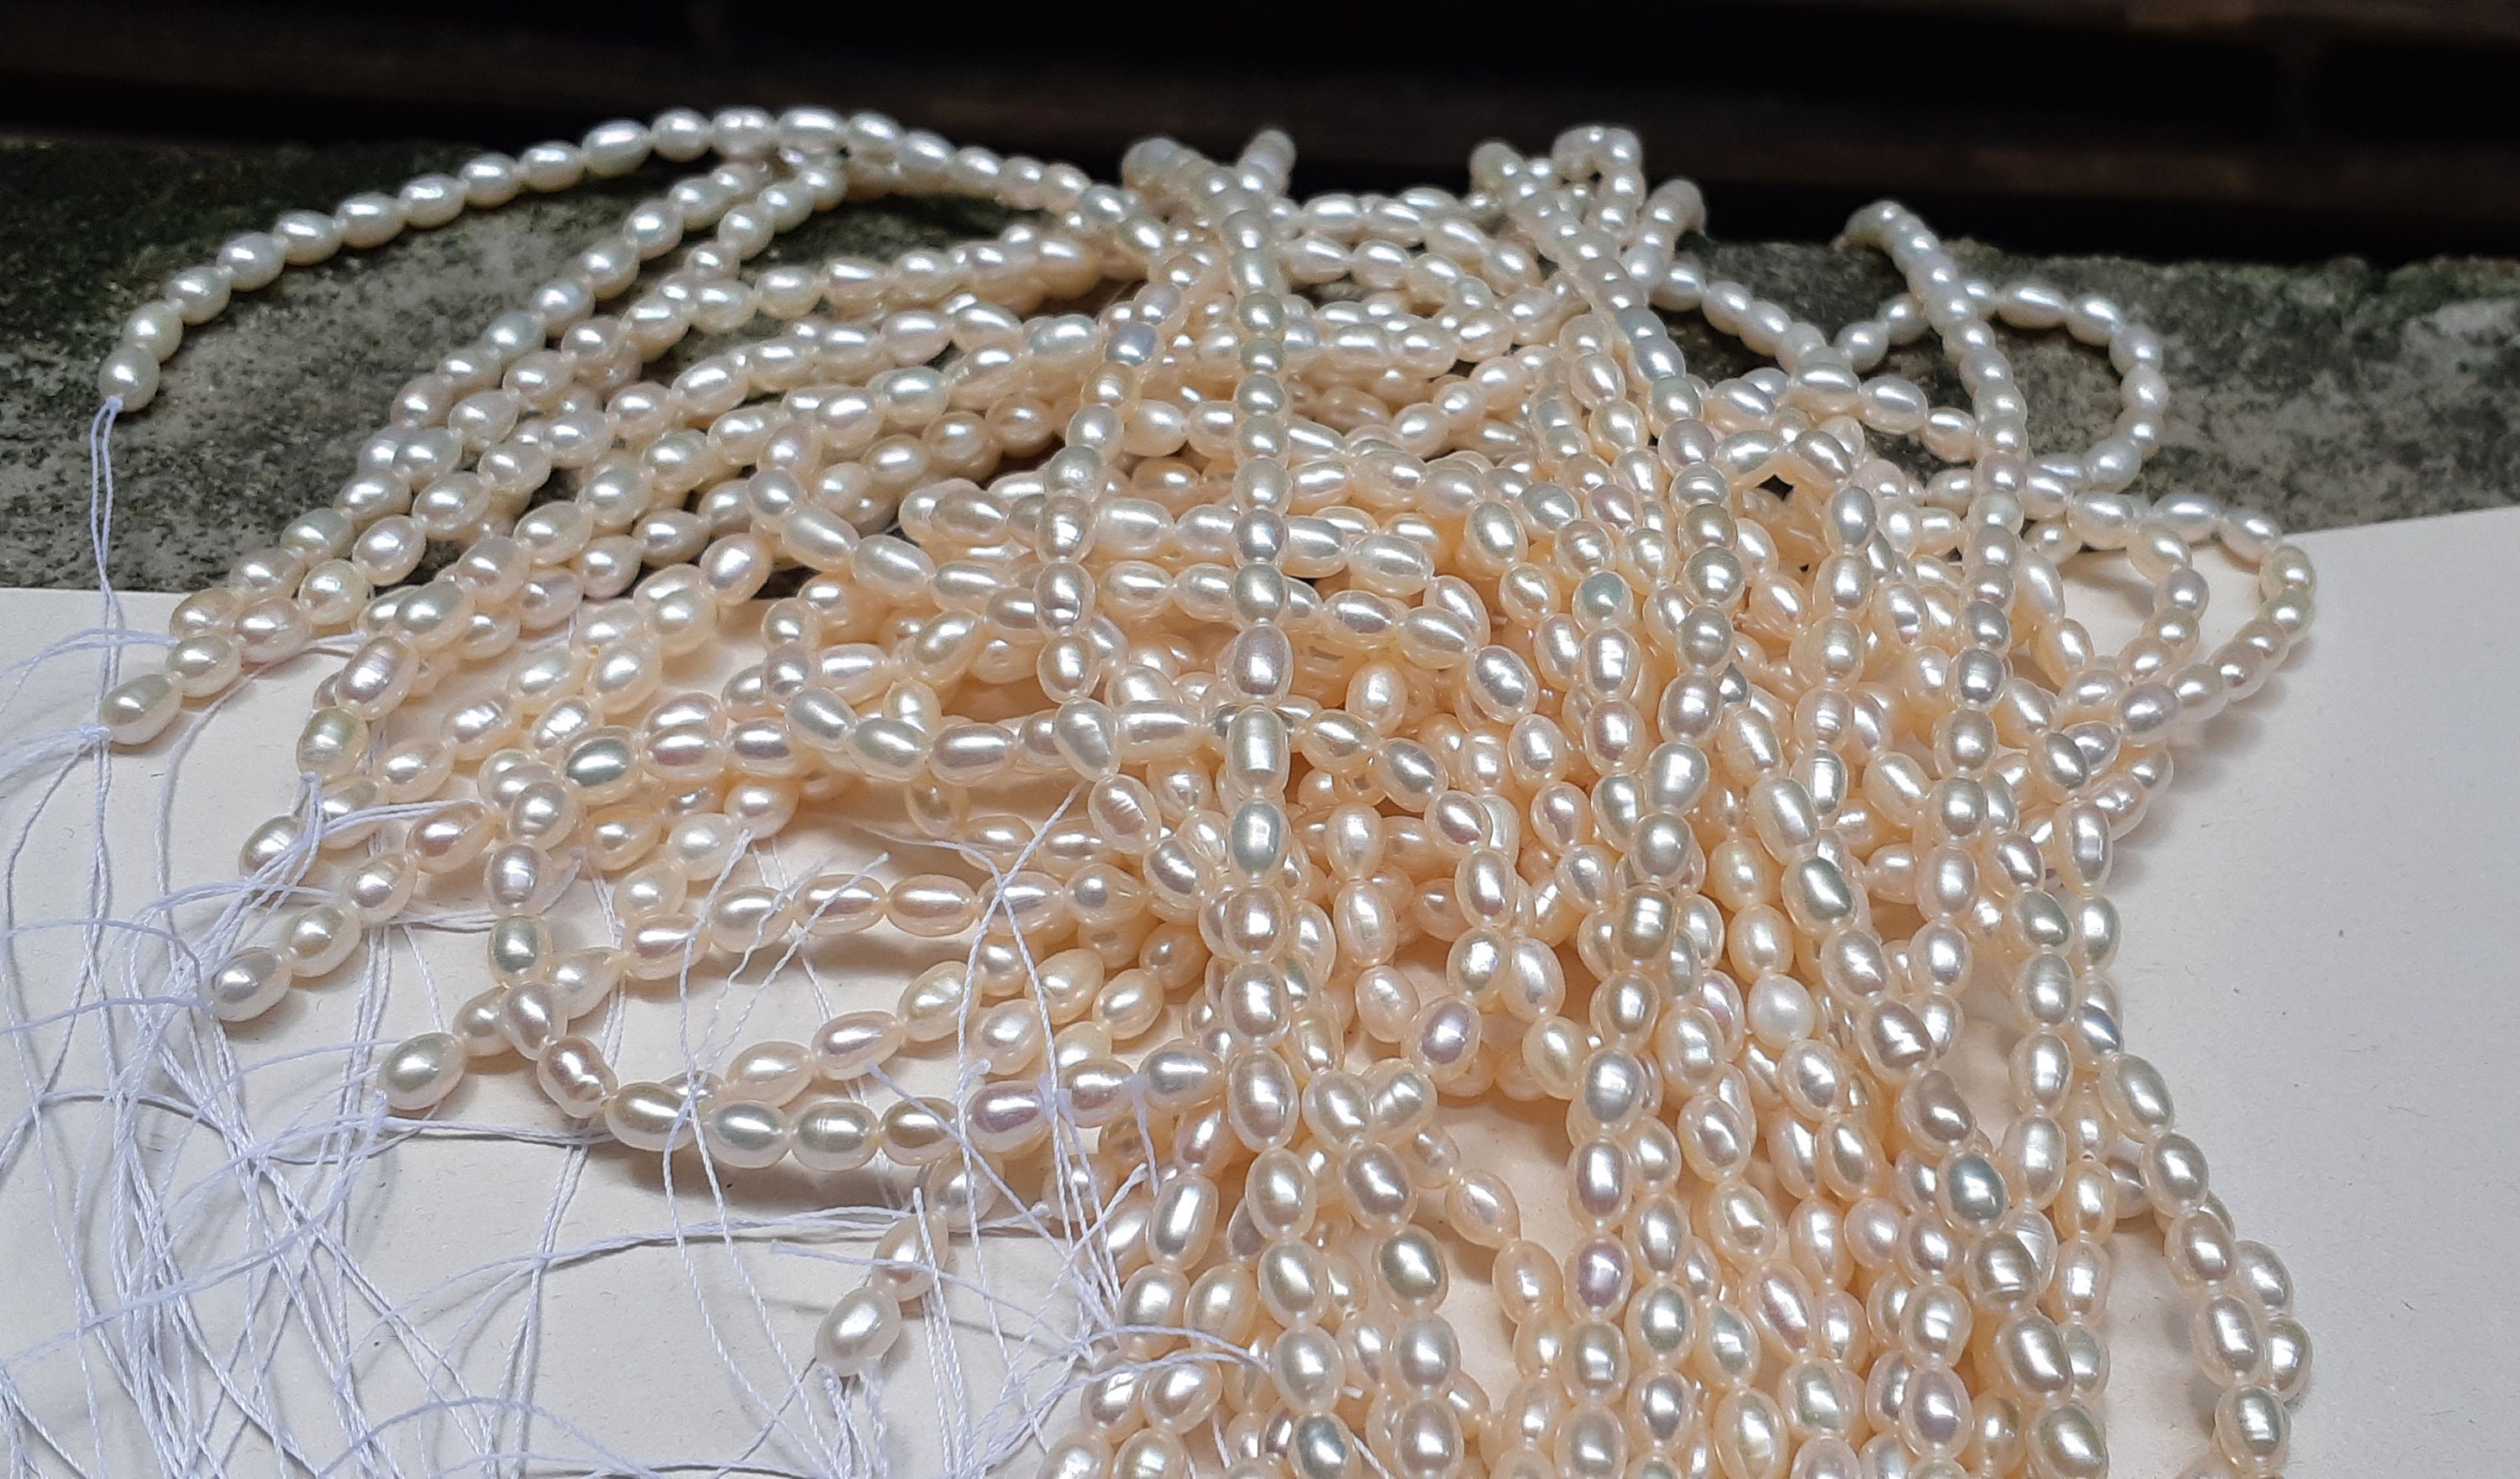 3.5-4mm AA Pearl Seed Beads, Genuine Freshwater Rice Pearls, Natural White  Oval Small Pearl Beads on Sale, High Quality Tiny Pearls FS800-WS 